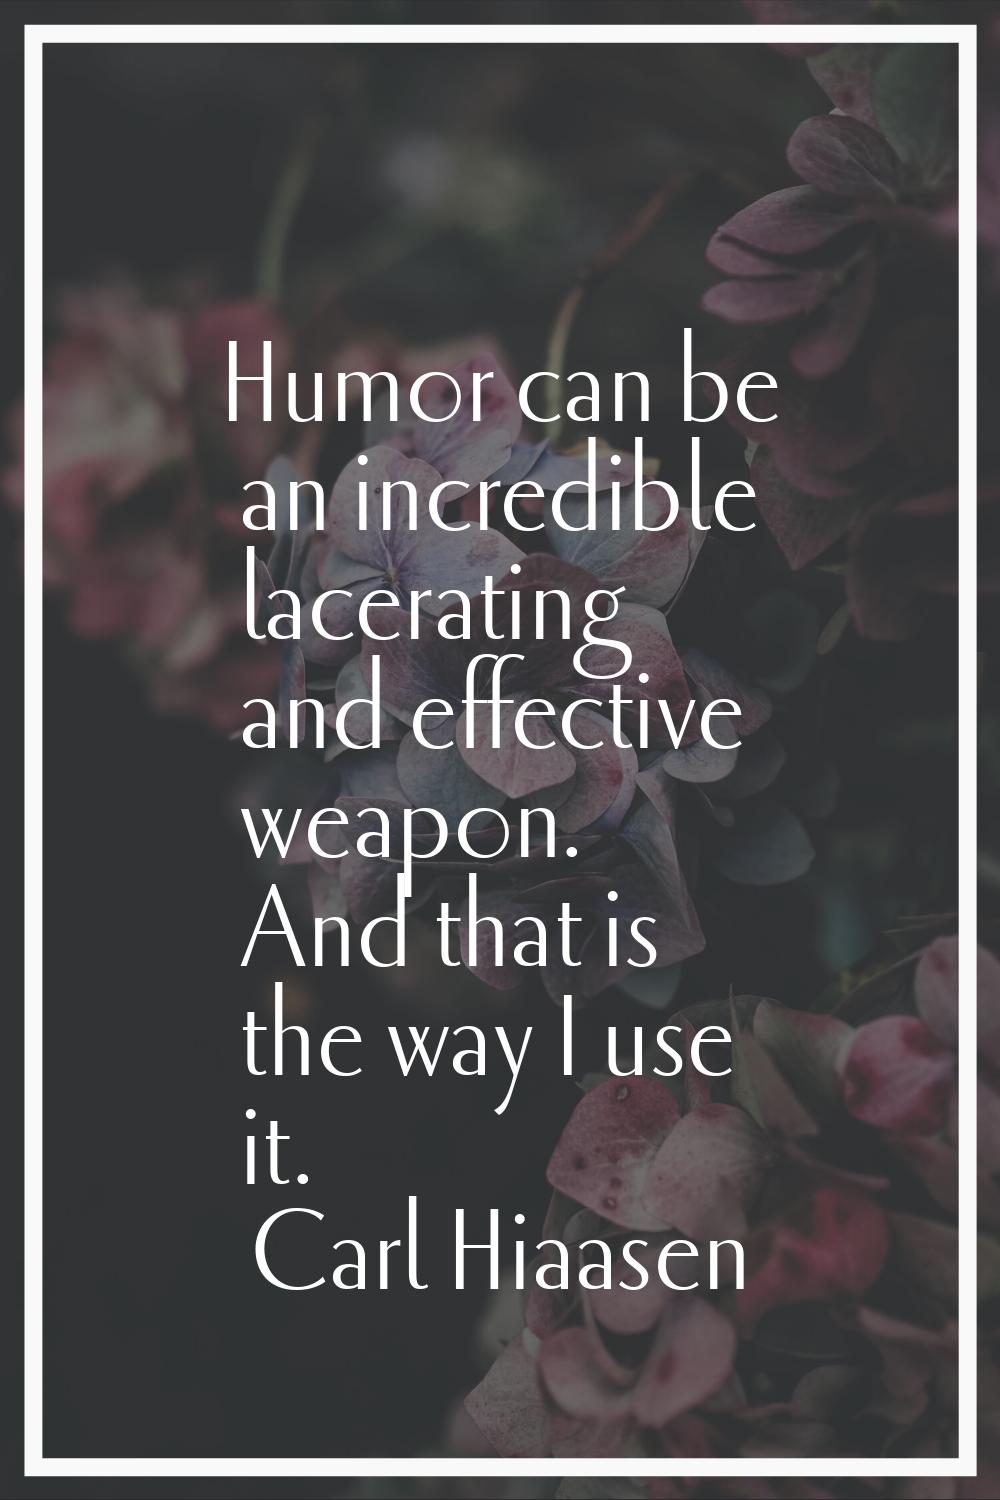 Humor can be an incredible lacerating and effective weapon. And that is the way I use it.